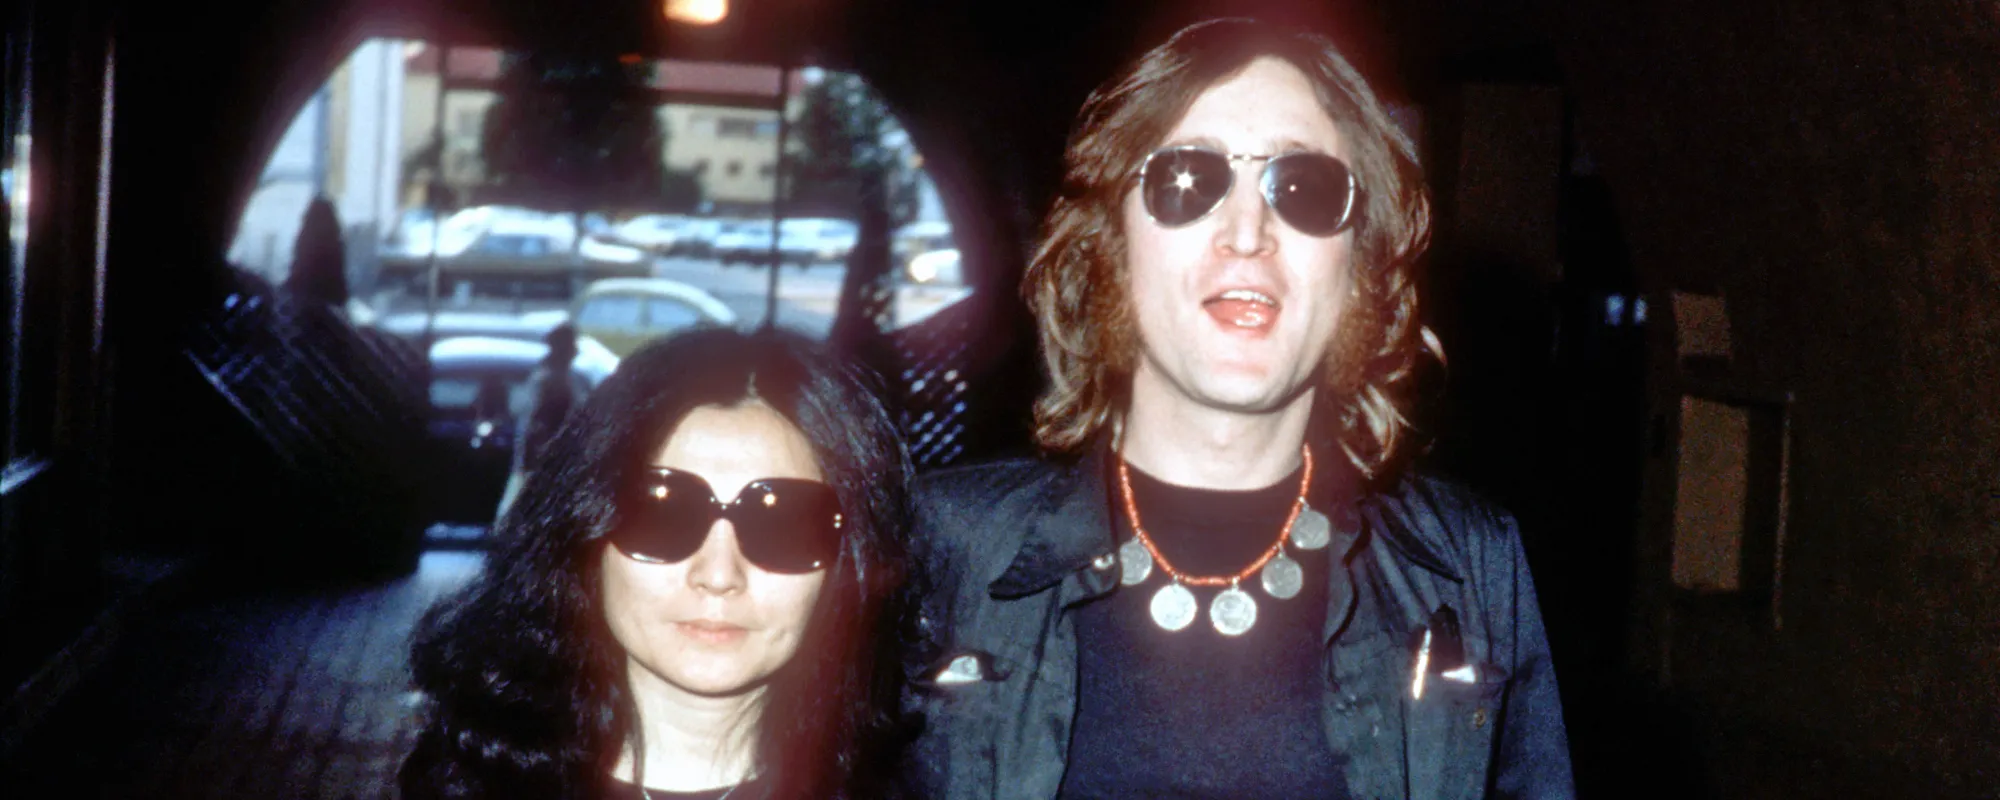 A Simple yet Powerful Declaration of Love: The Meaning Behind “Oh Yoko!” by John Lennon